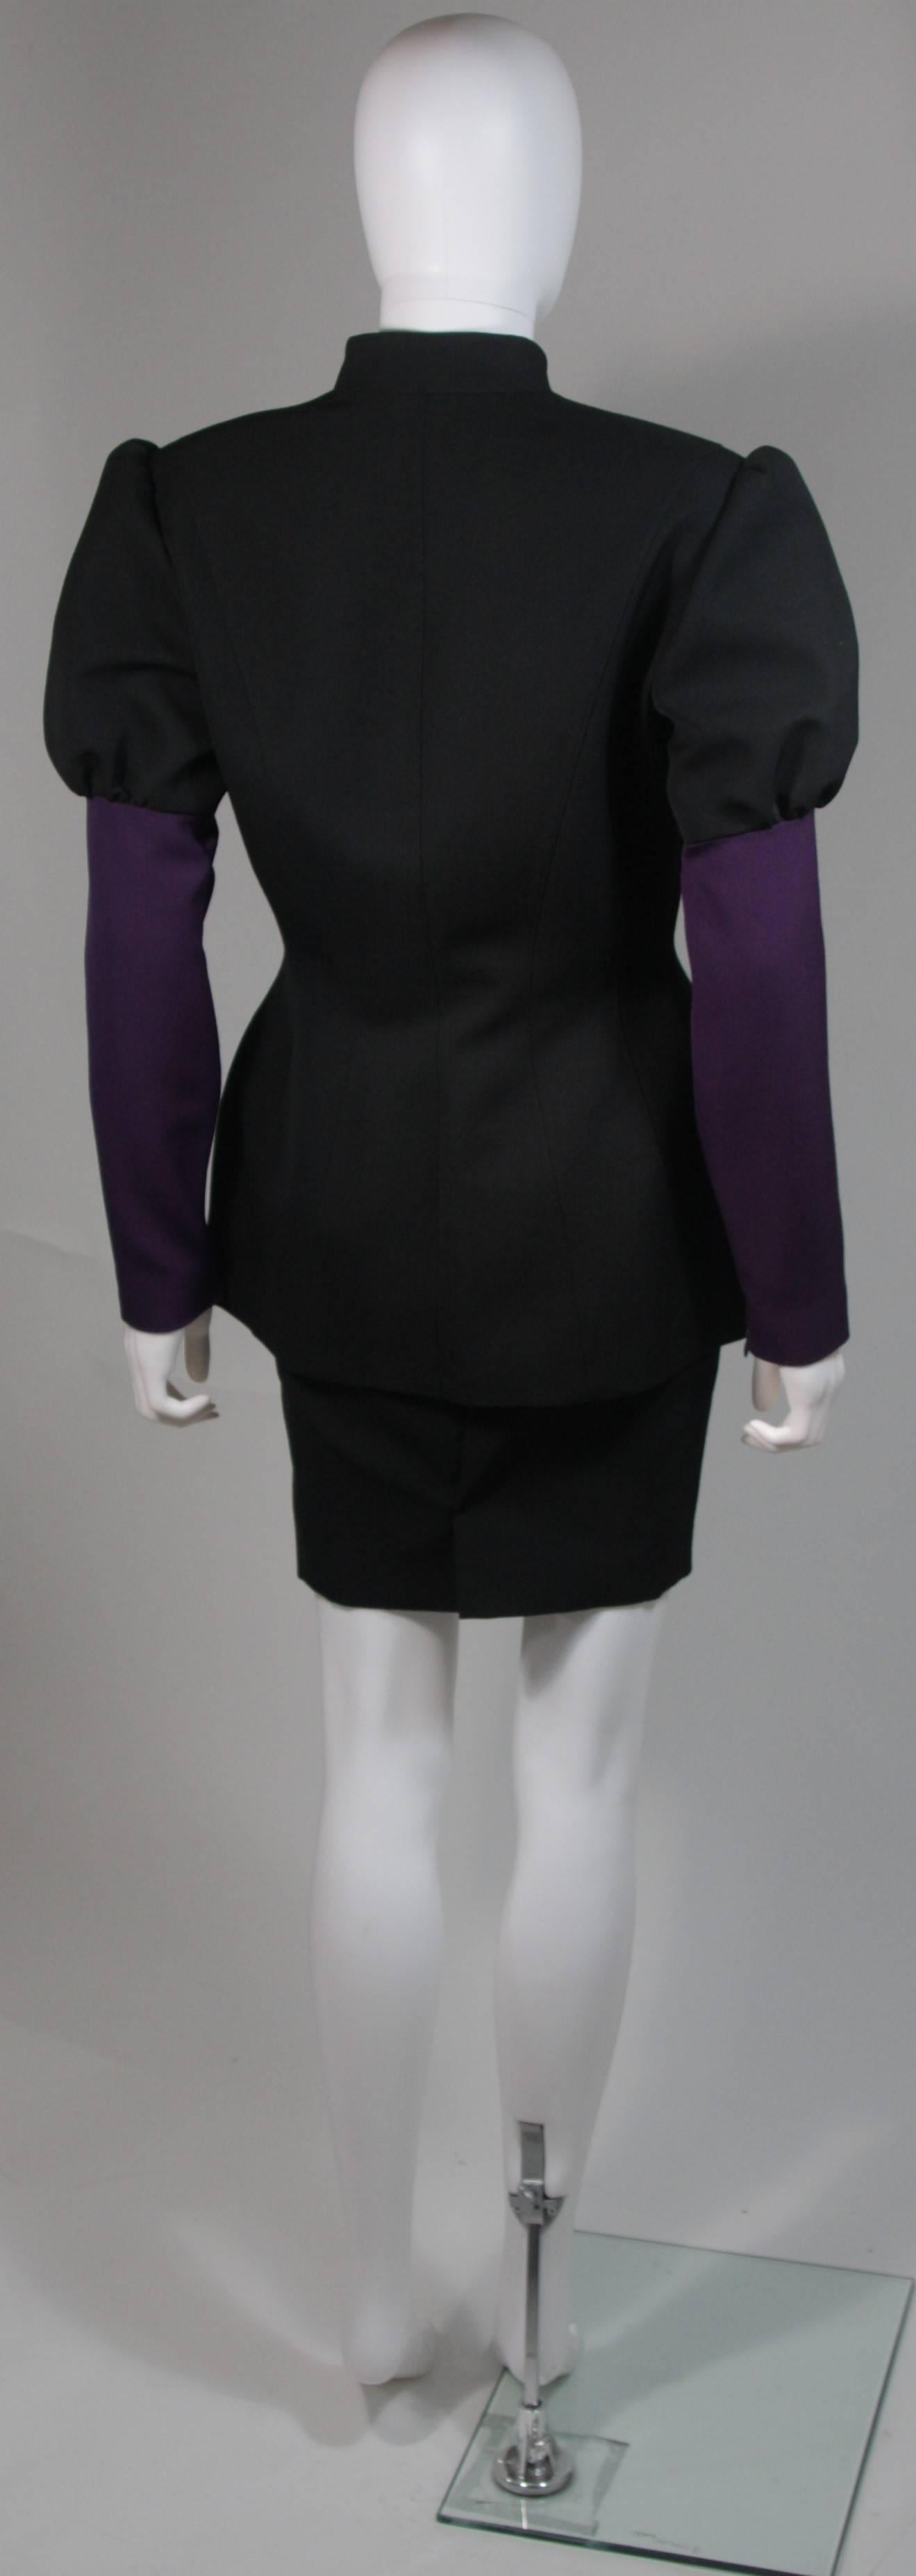 Thierry Mugler Black and Purple Skirt Suit Size Small 1